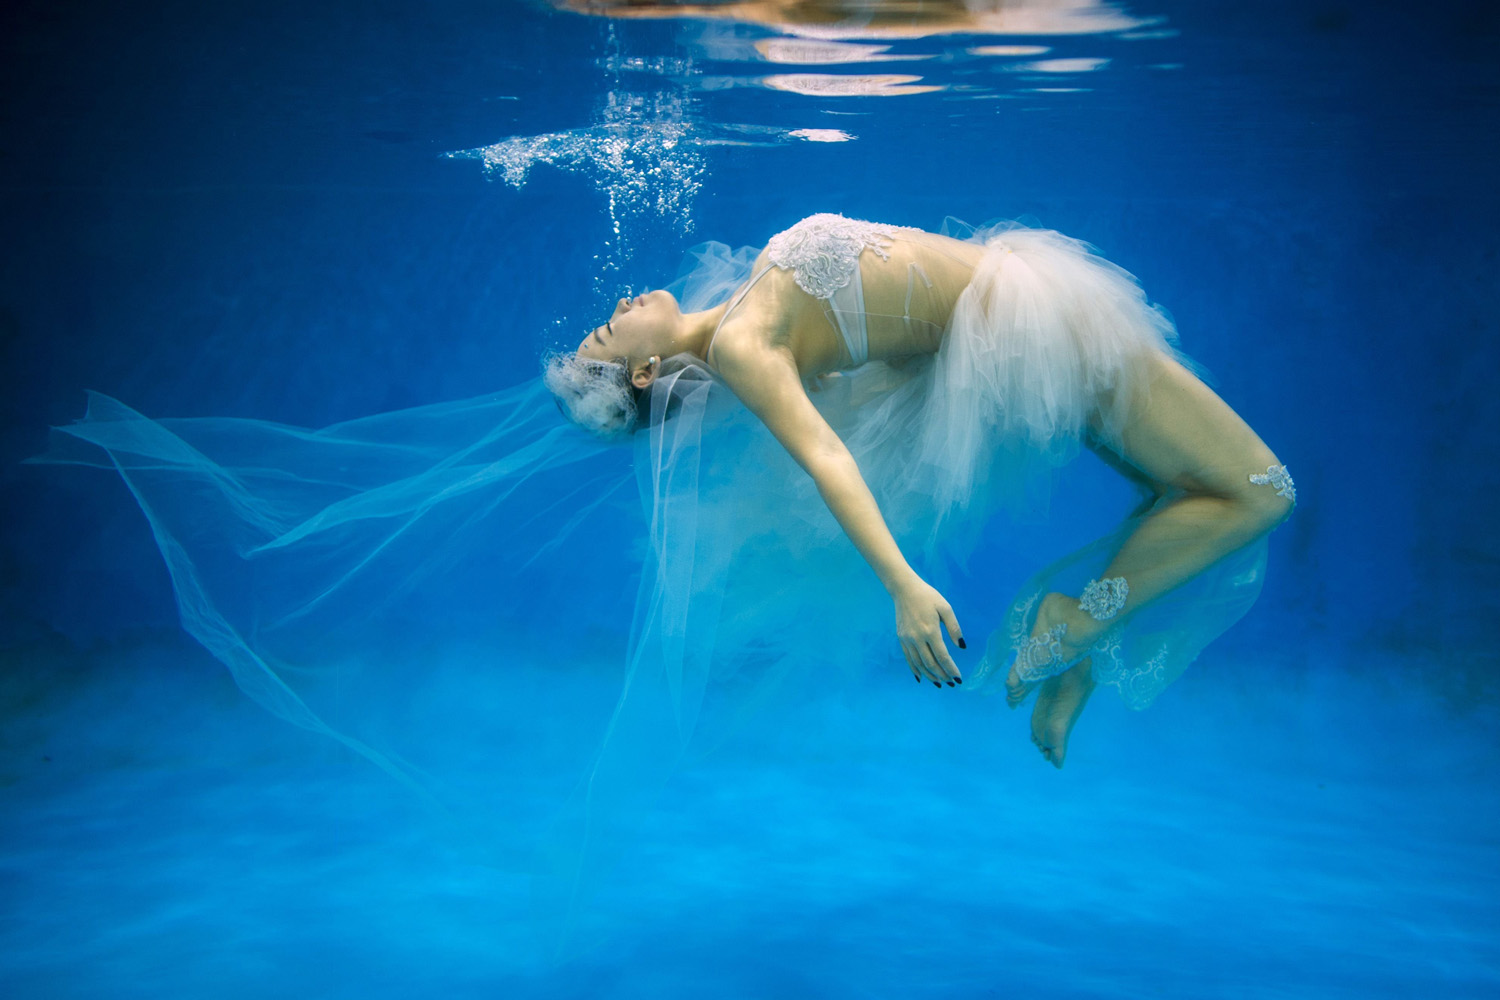 Leng Yuting, 26, poses underwater for her wedding pictures at a photo studio in Shanghai, Sept. 3, 2014.